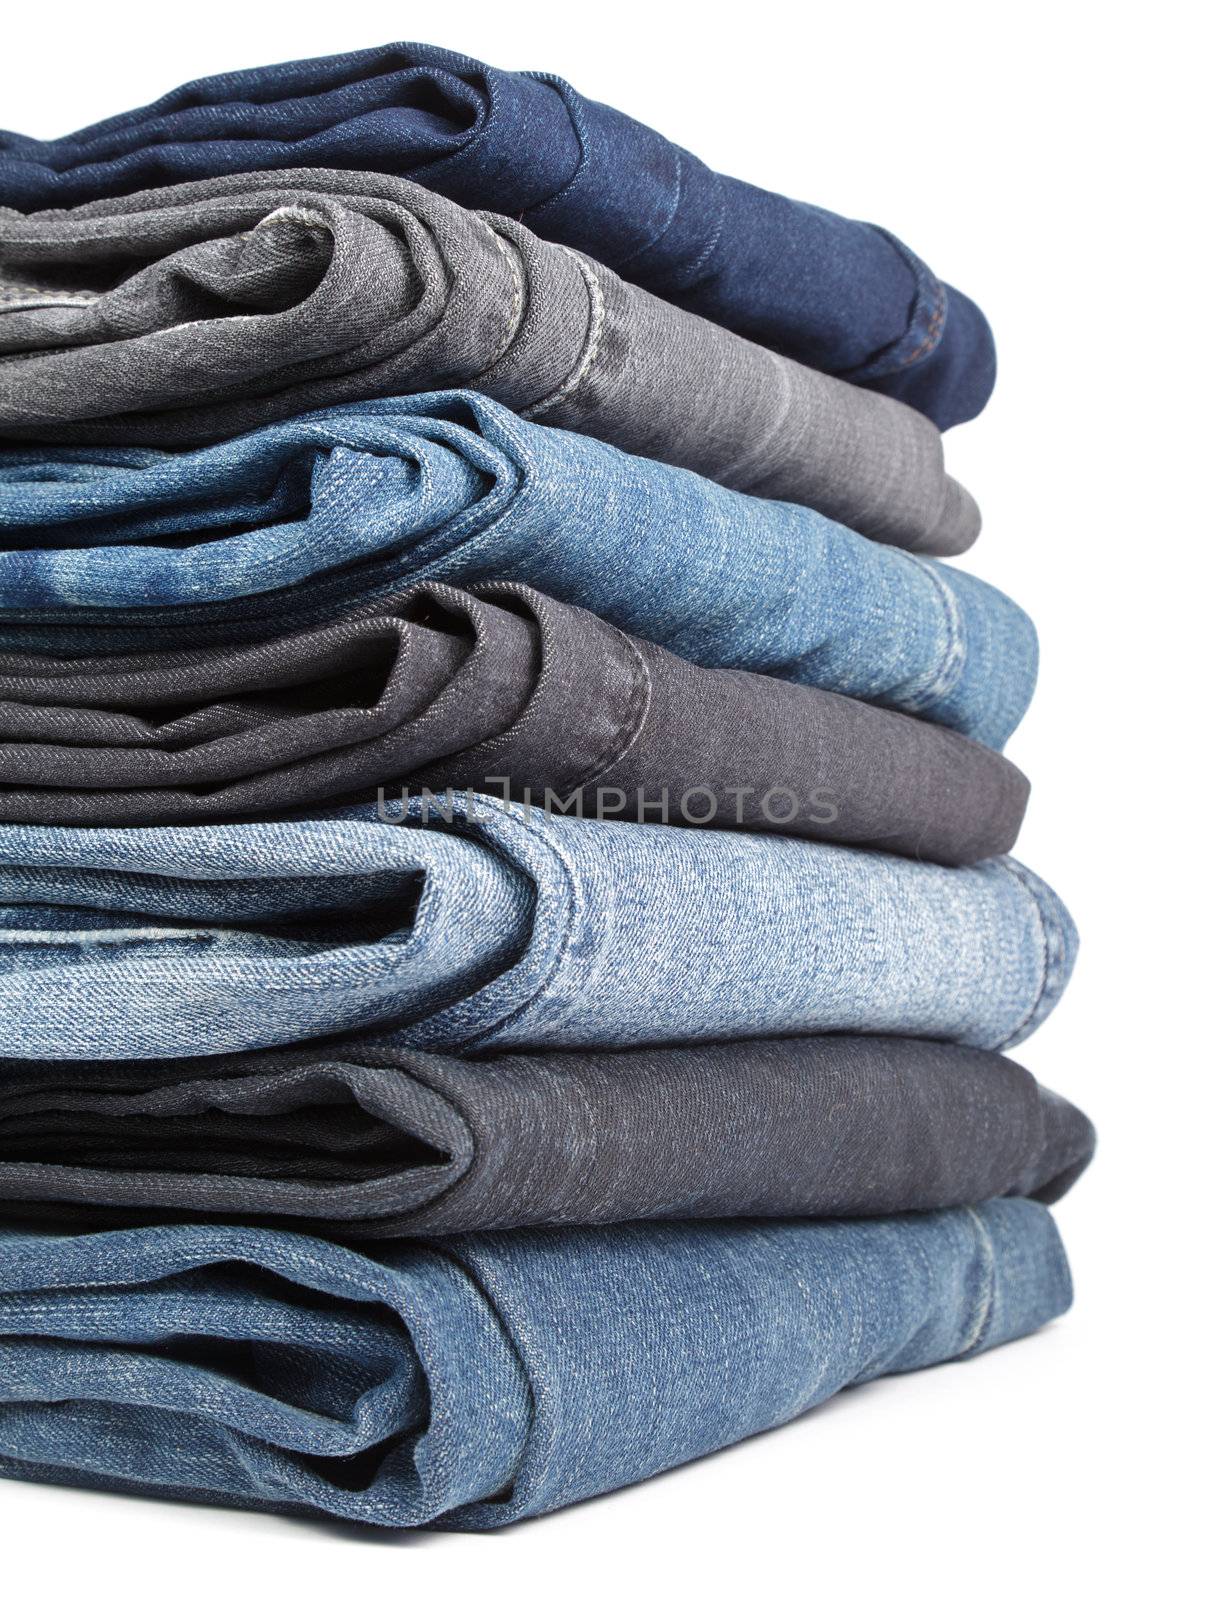 Jeans pile by naumoid